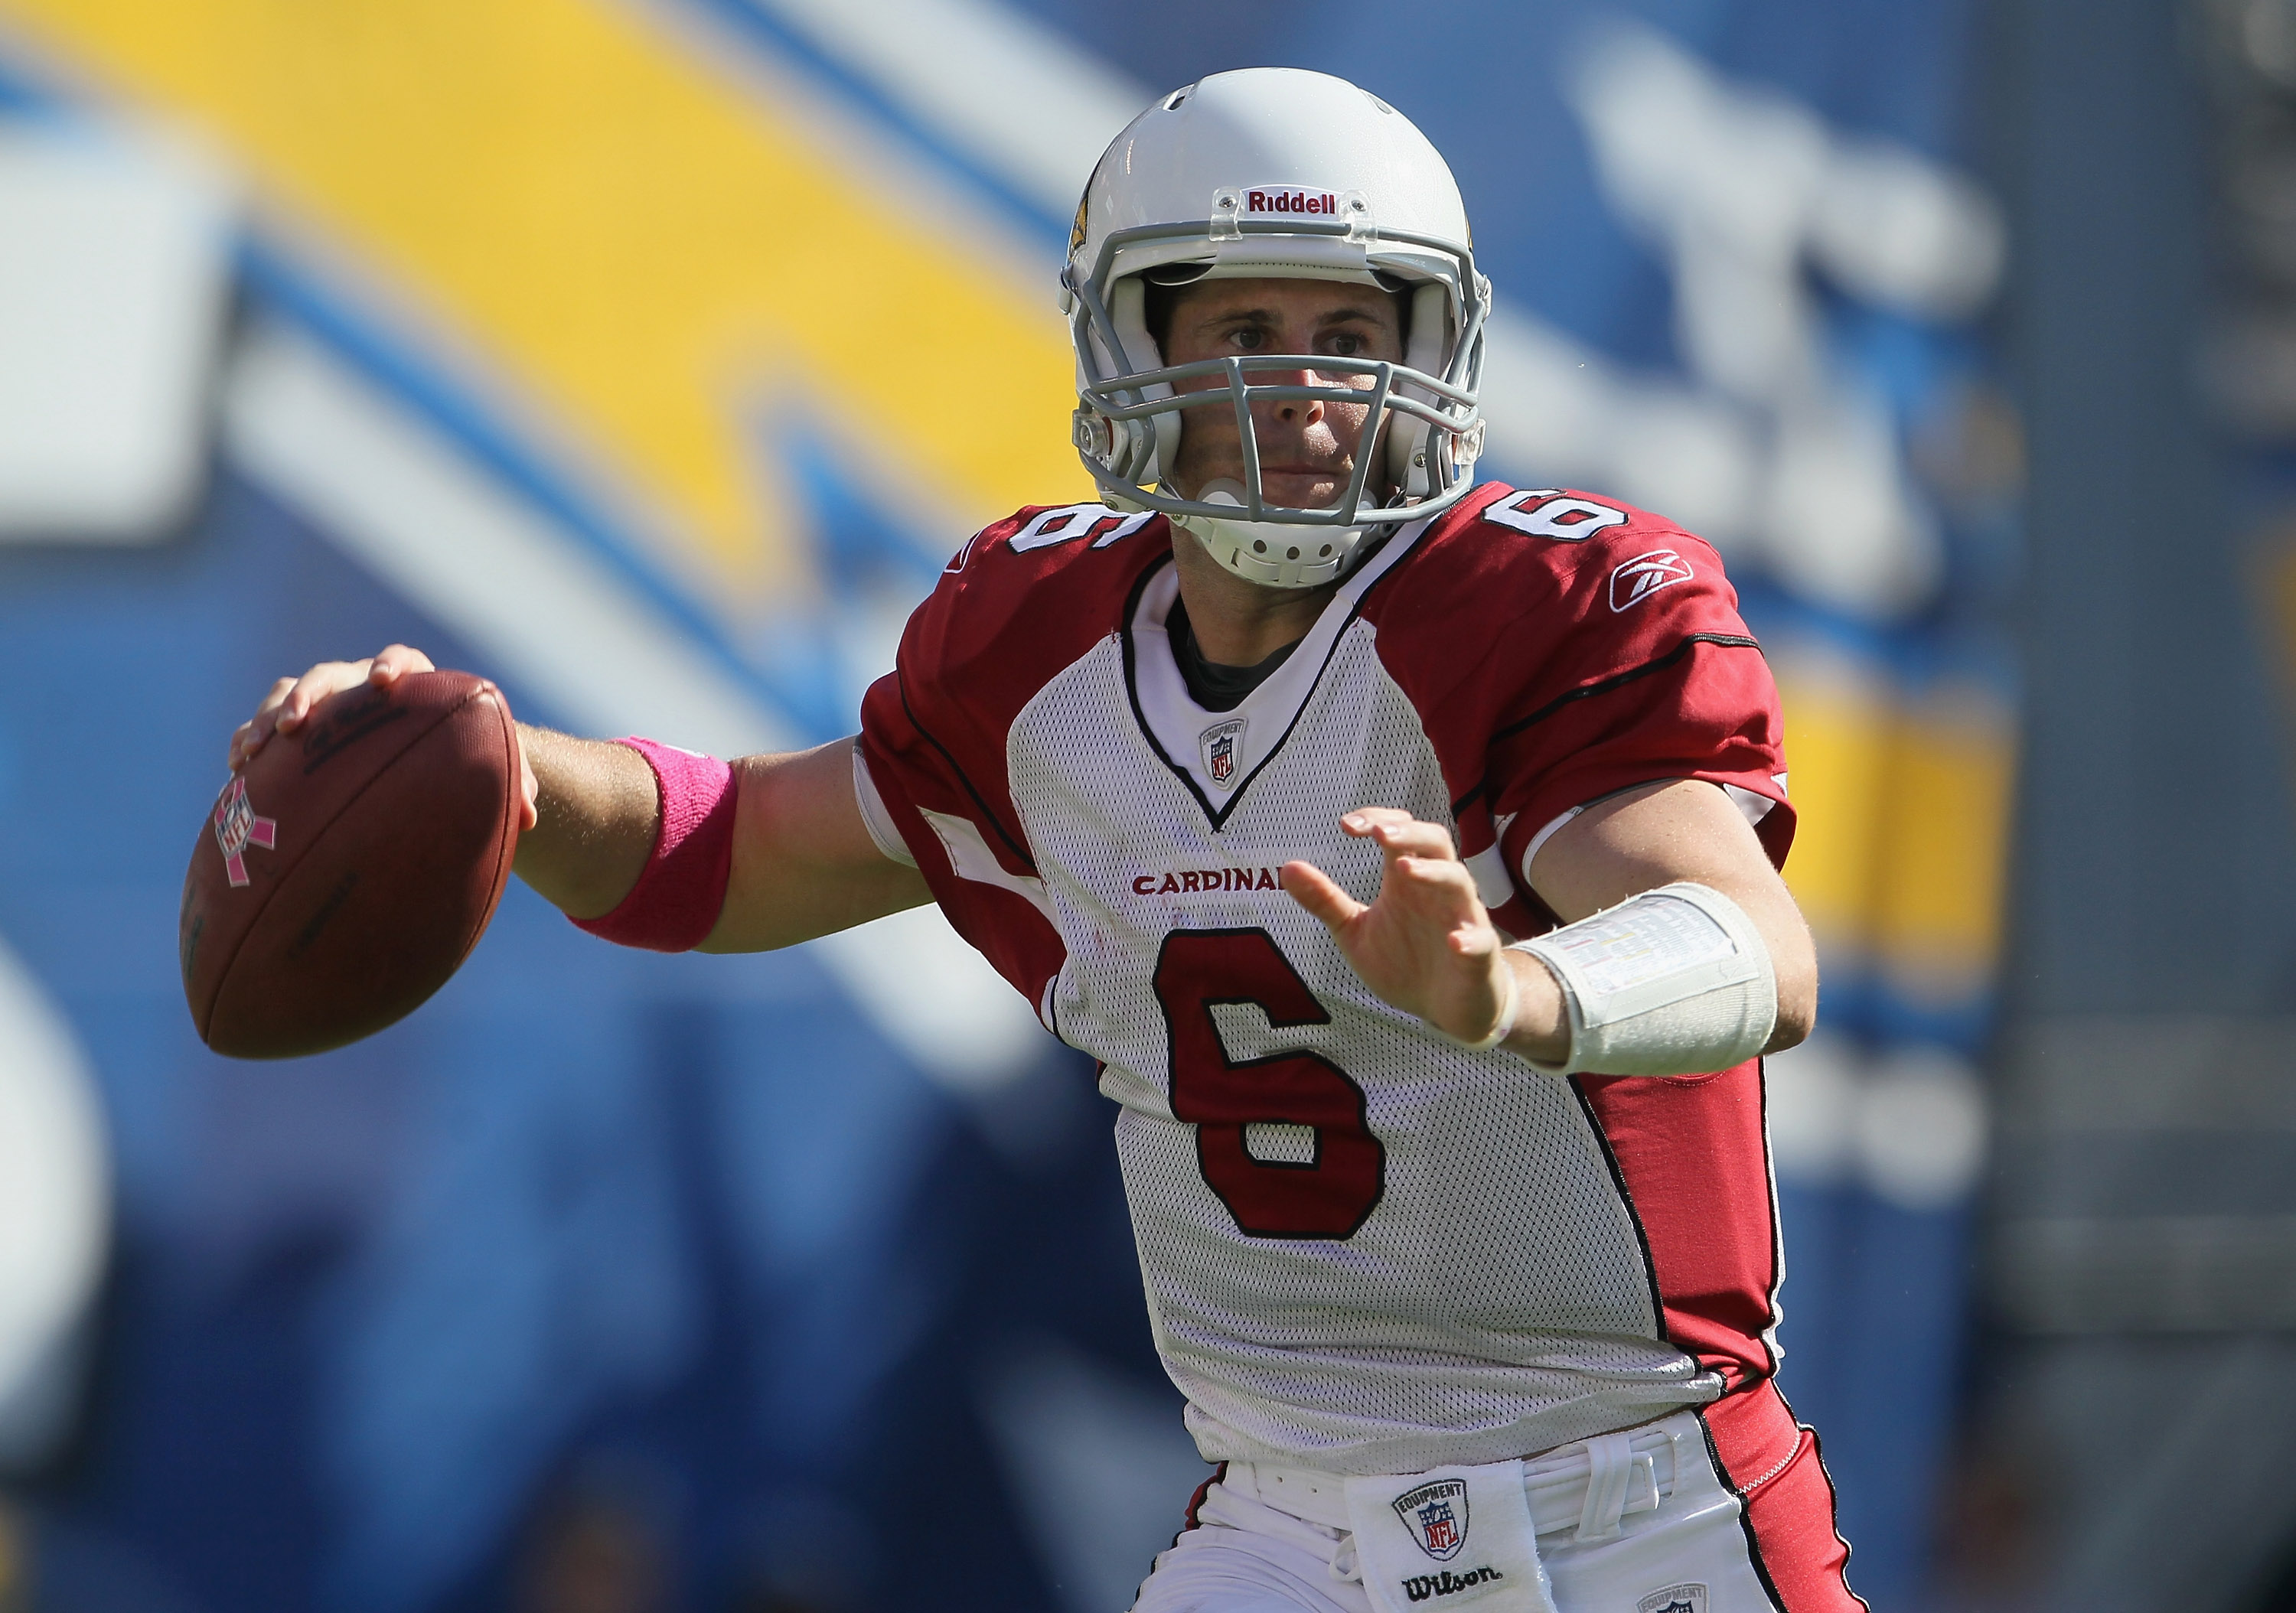 SAN DIEGO - OCTOBER 03:  Quarterback Max Hall #6 of the Arizona Cardinals drops back to pass in the third quarter against the San Diego Chargers at Qualcomm Stadium on October 3, 2010 in San Diego, California. The Chargers defeated the Cardinals 41-10.  (